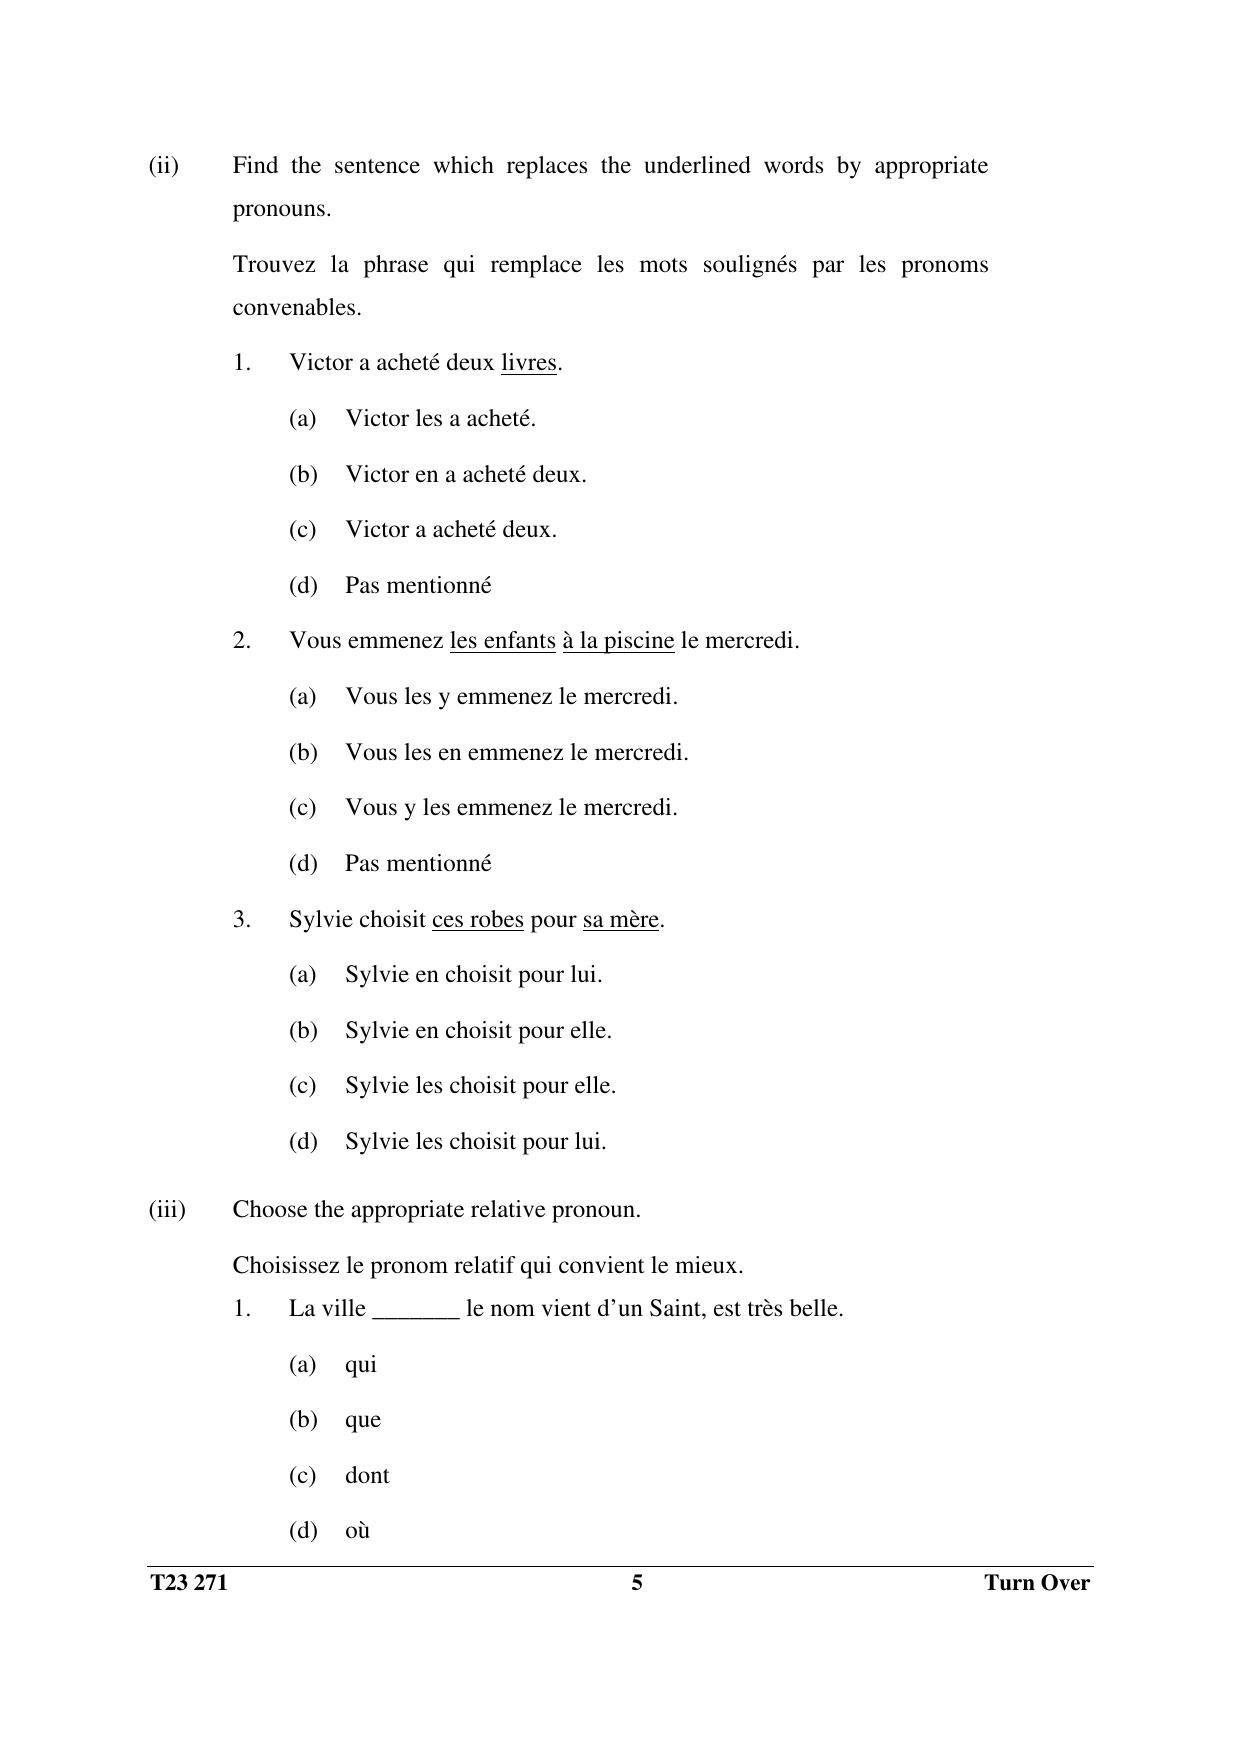 ICSE Class 10 FRENCH 2023 Question Paper - Page 5